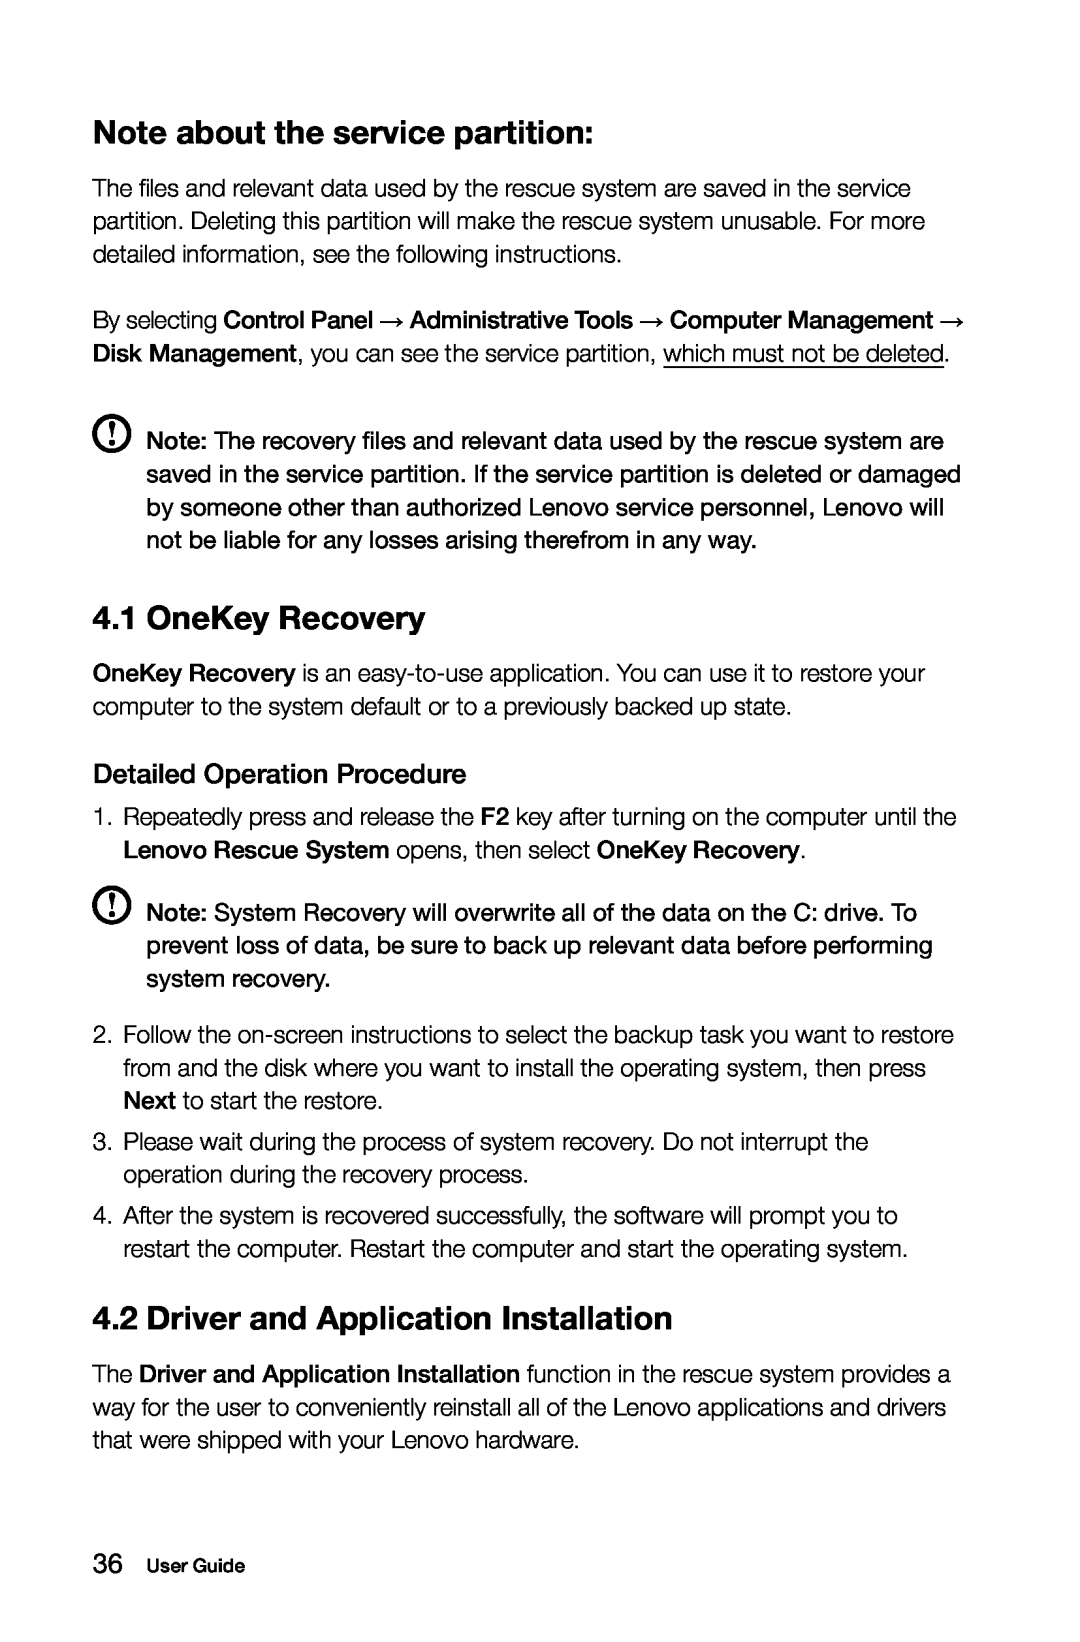 Lenovo 2568 [B540] 10101, 97 manual Note about the service partition, OneKey Recovery, Driver and Application Installation 